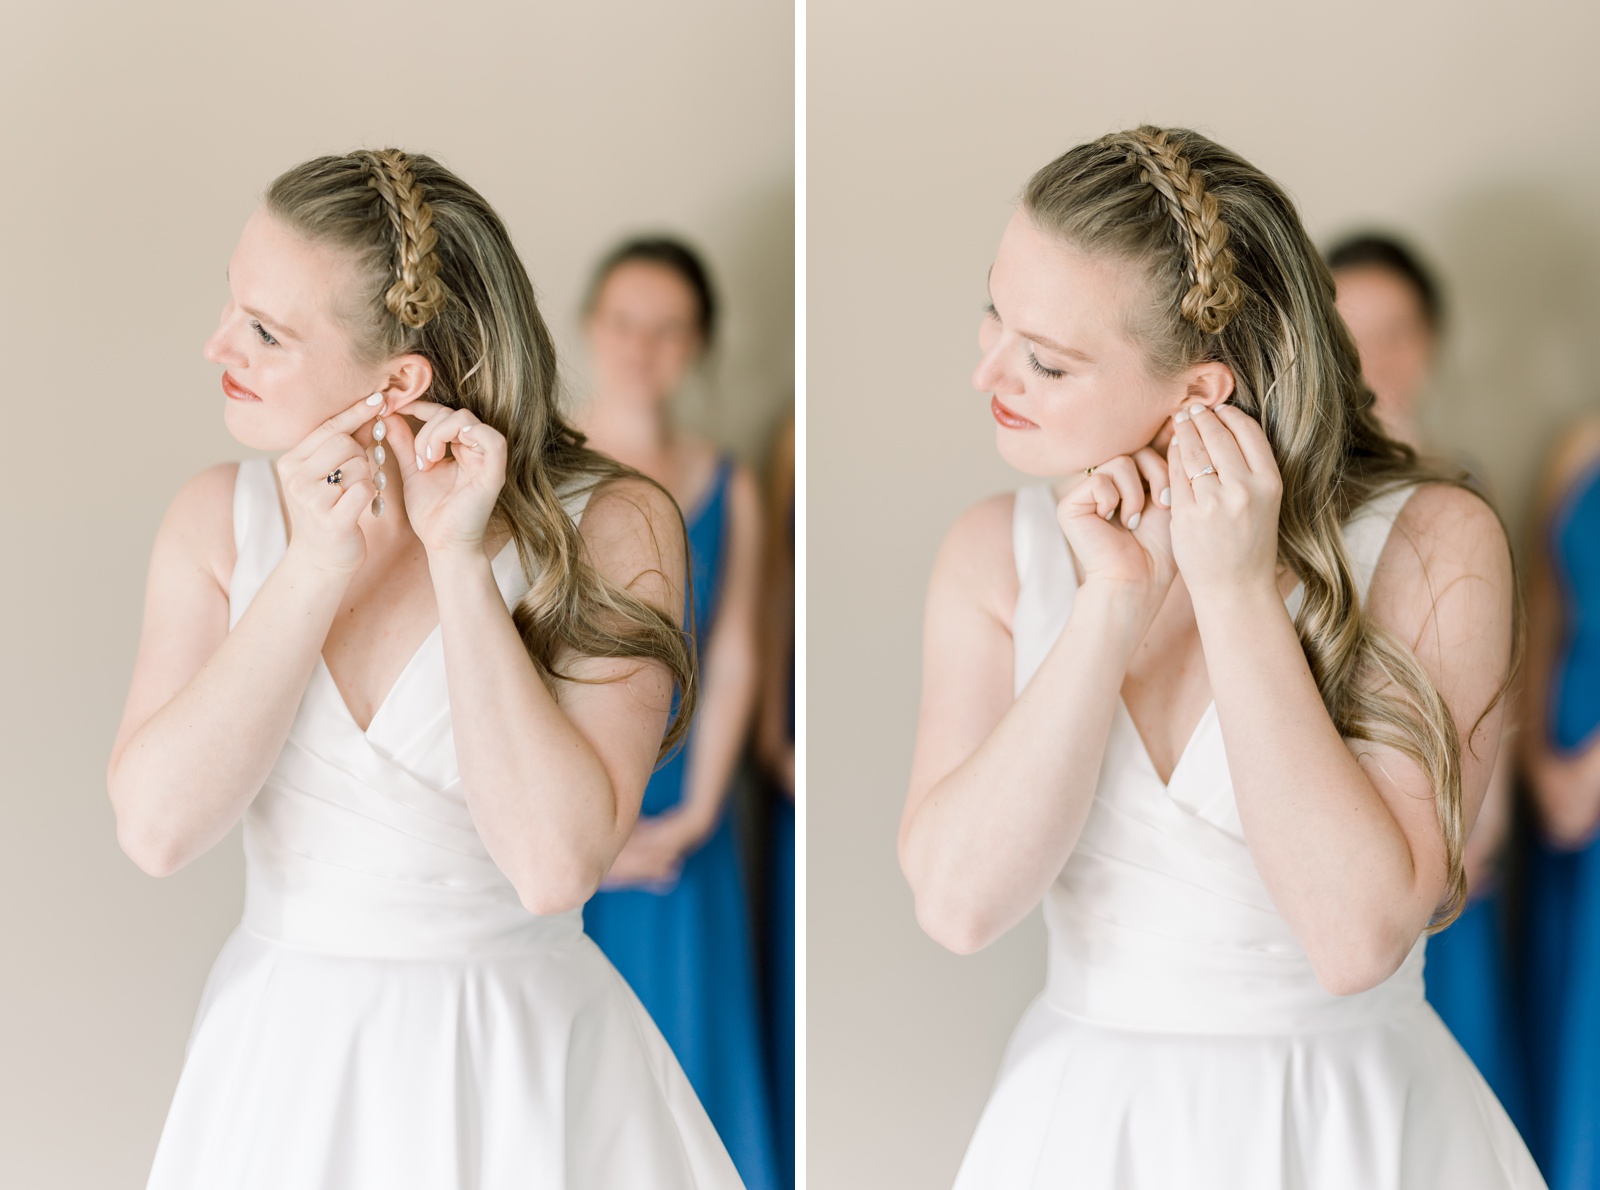 tips for wedding photographers to create better photos